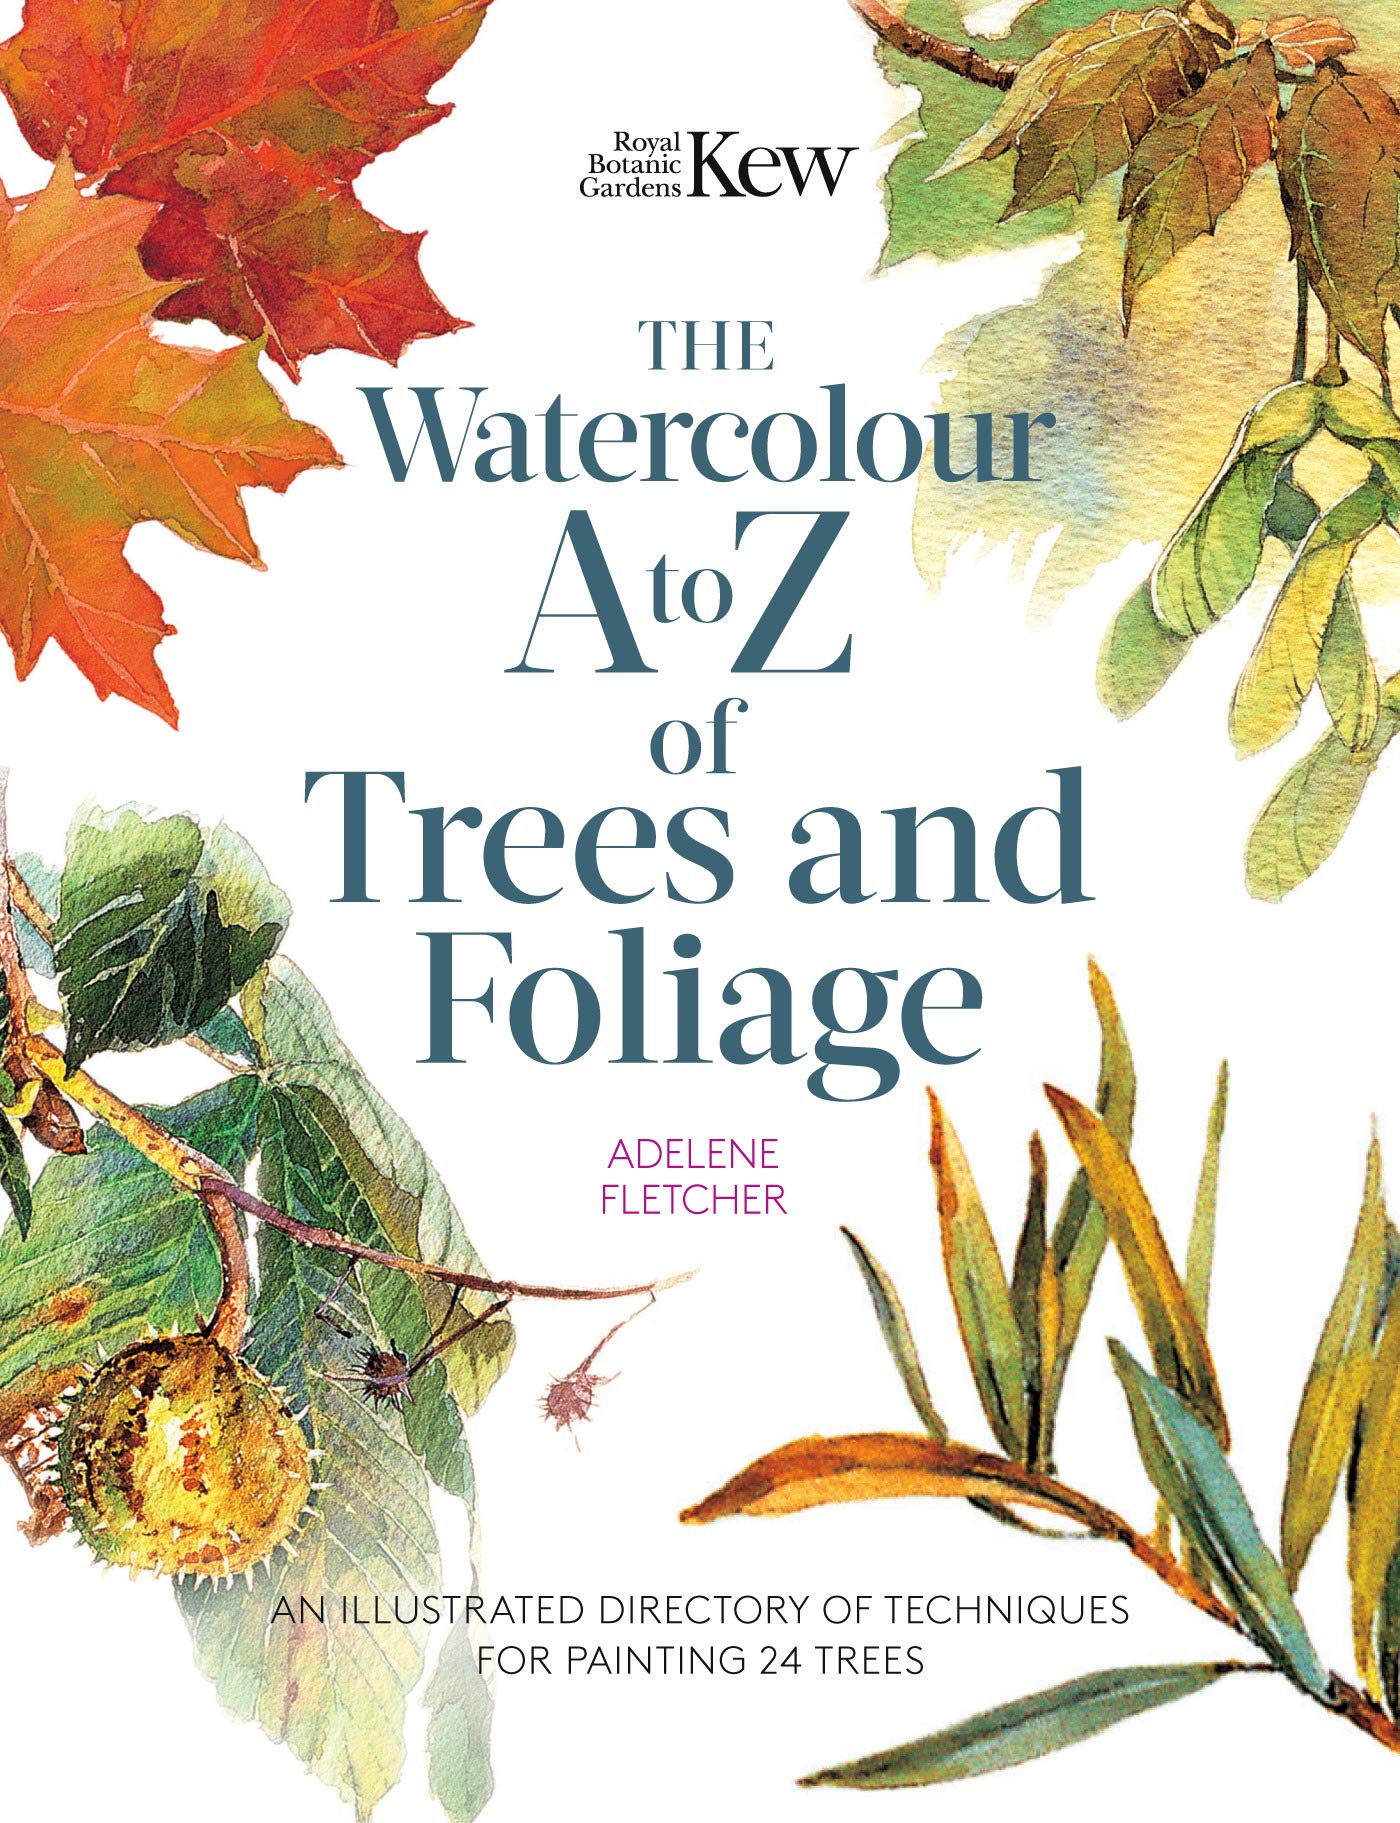 Watercolor A to Z of Trees and Foliage